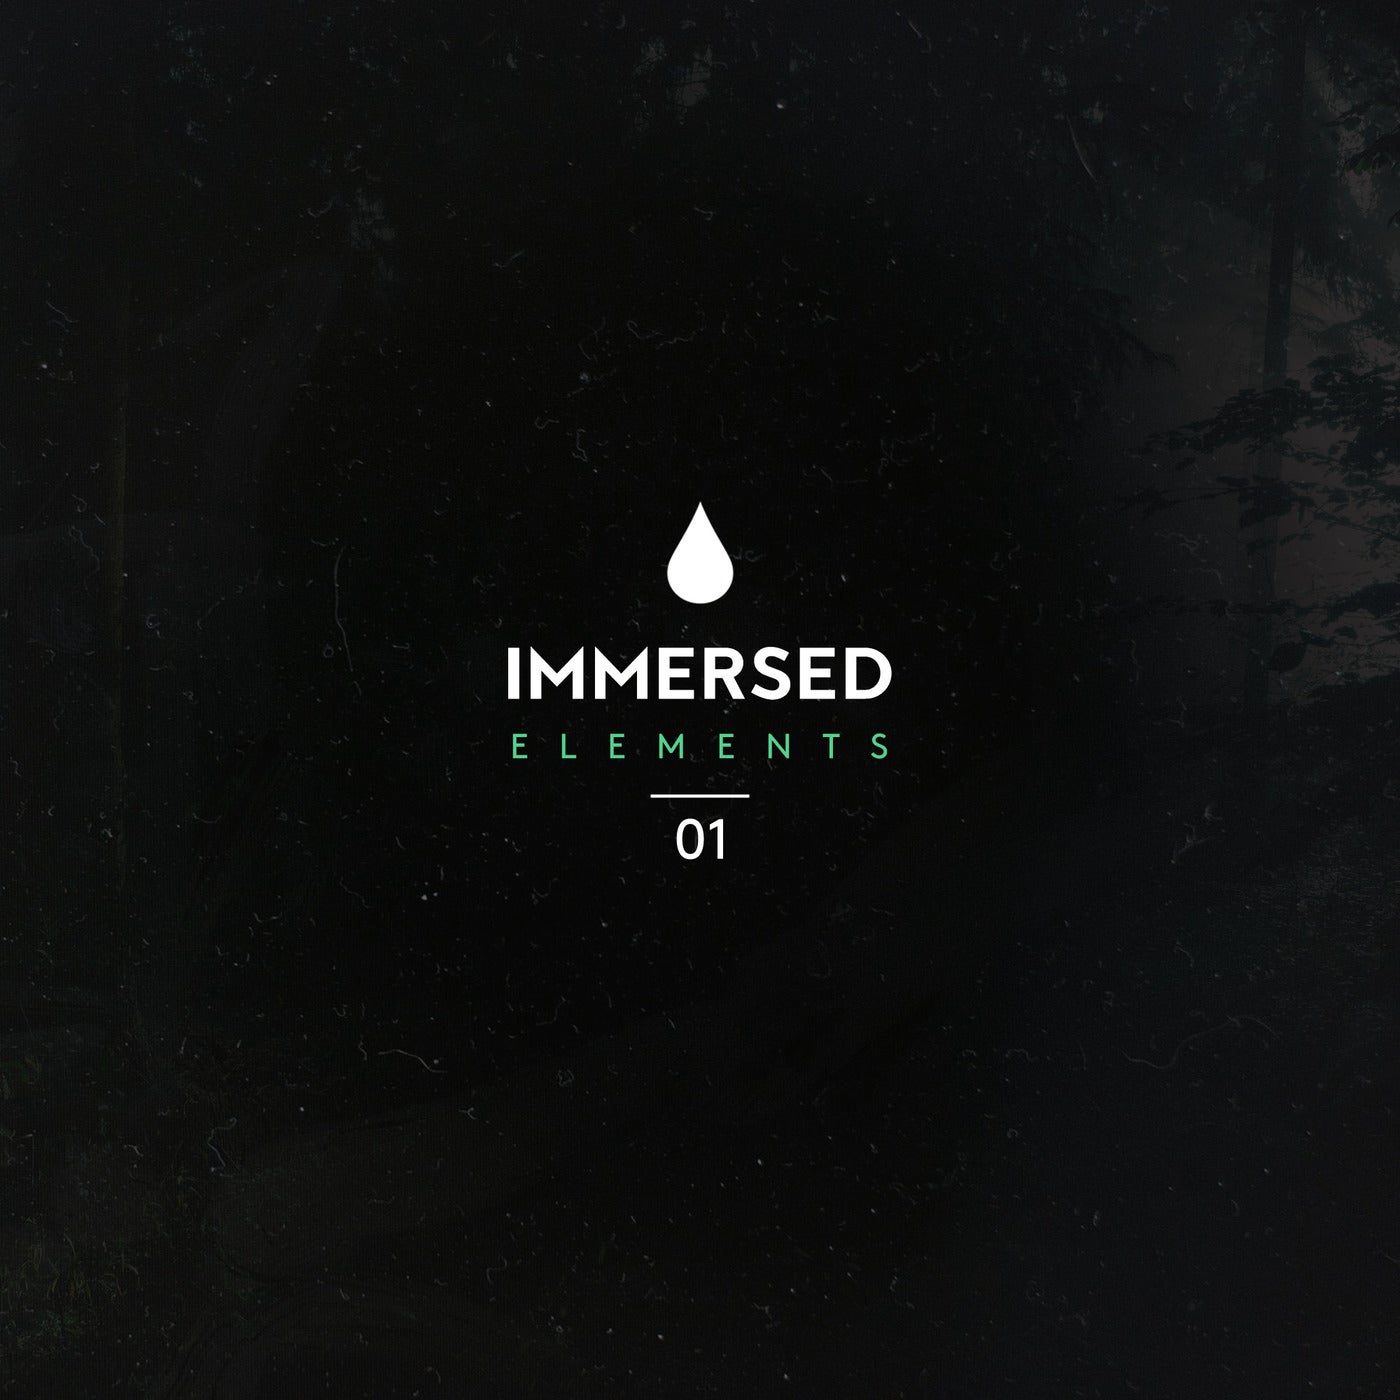 Immersed Elements 01